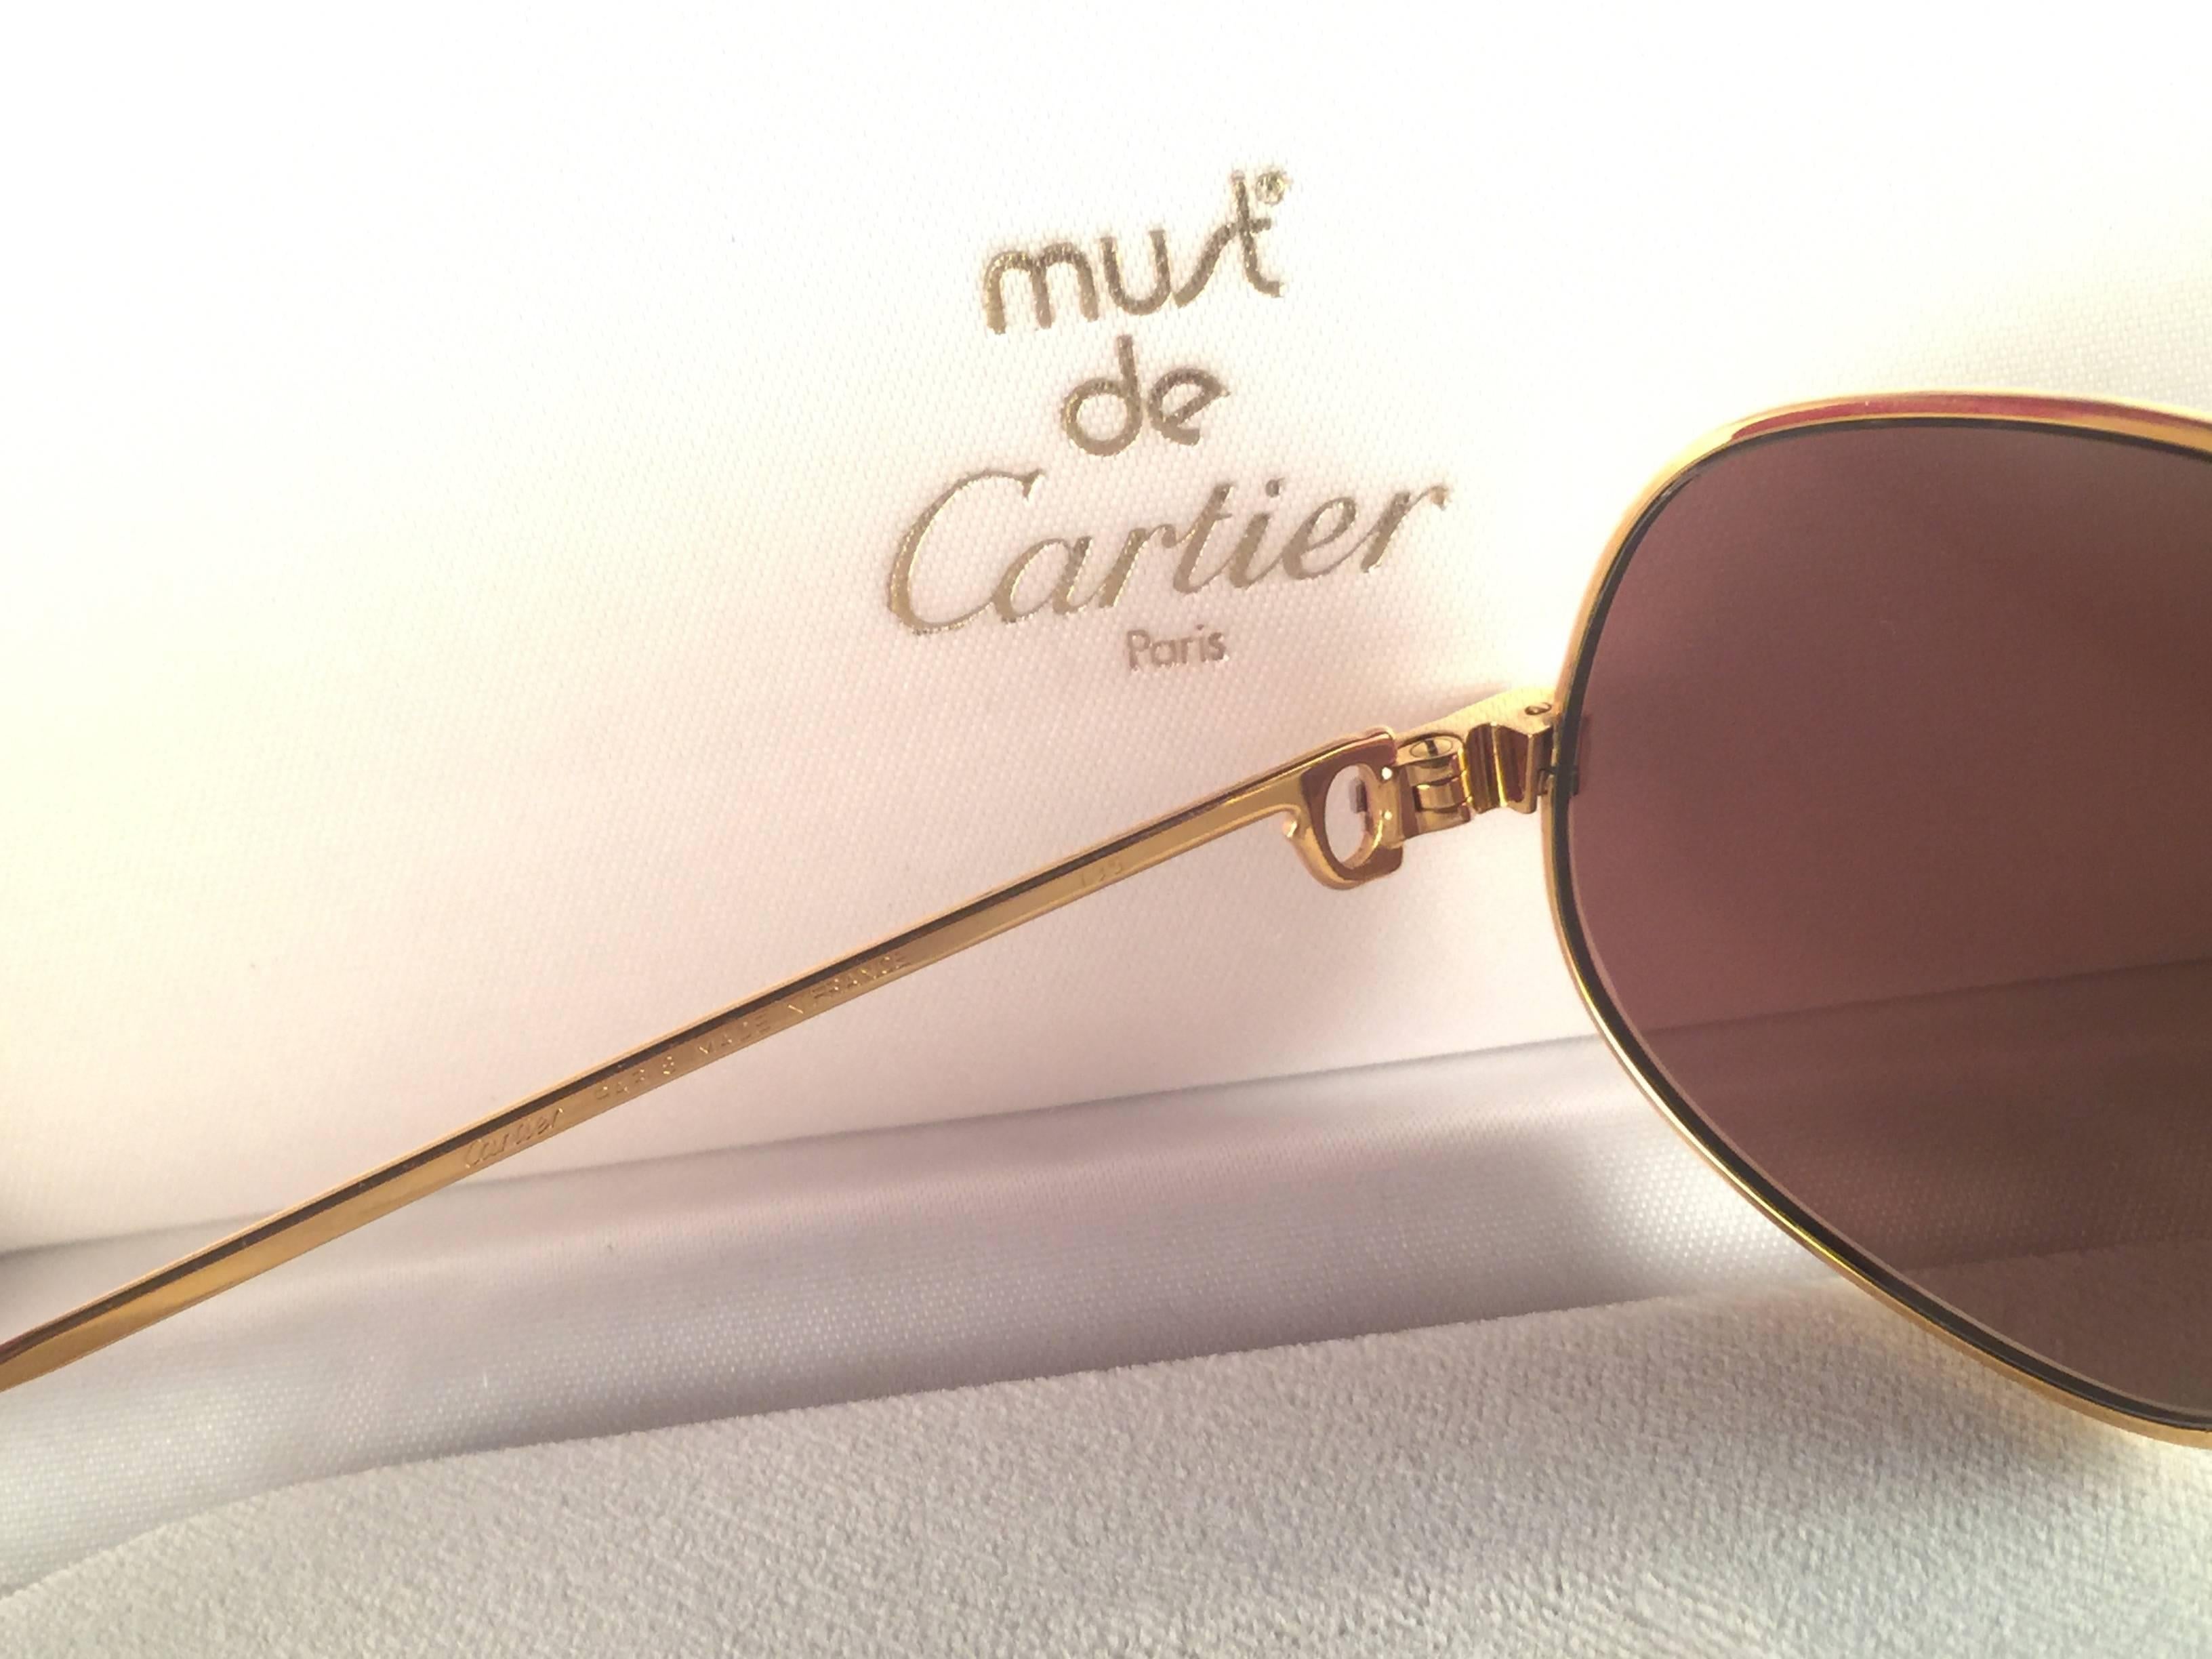 New Vintage Cartier Panthere 59mm Medium Sunglasses France 18k Gold Heavy Plated 1